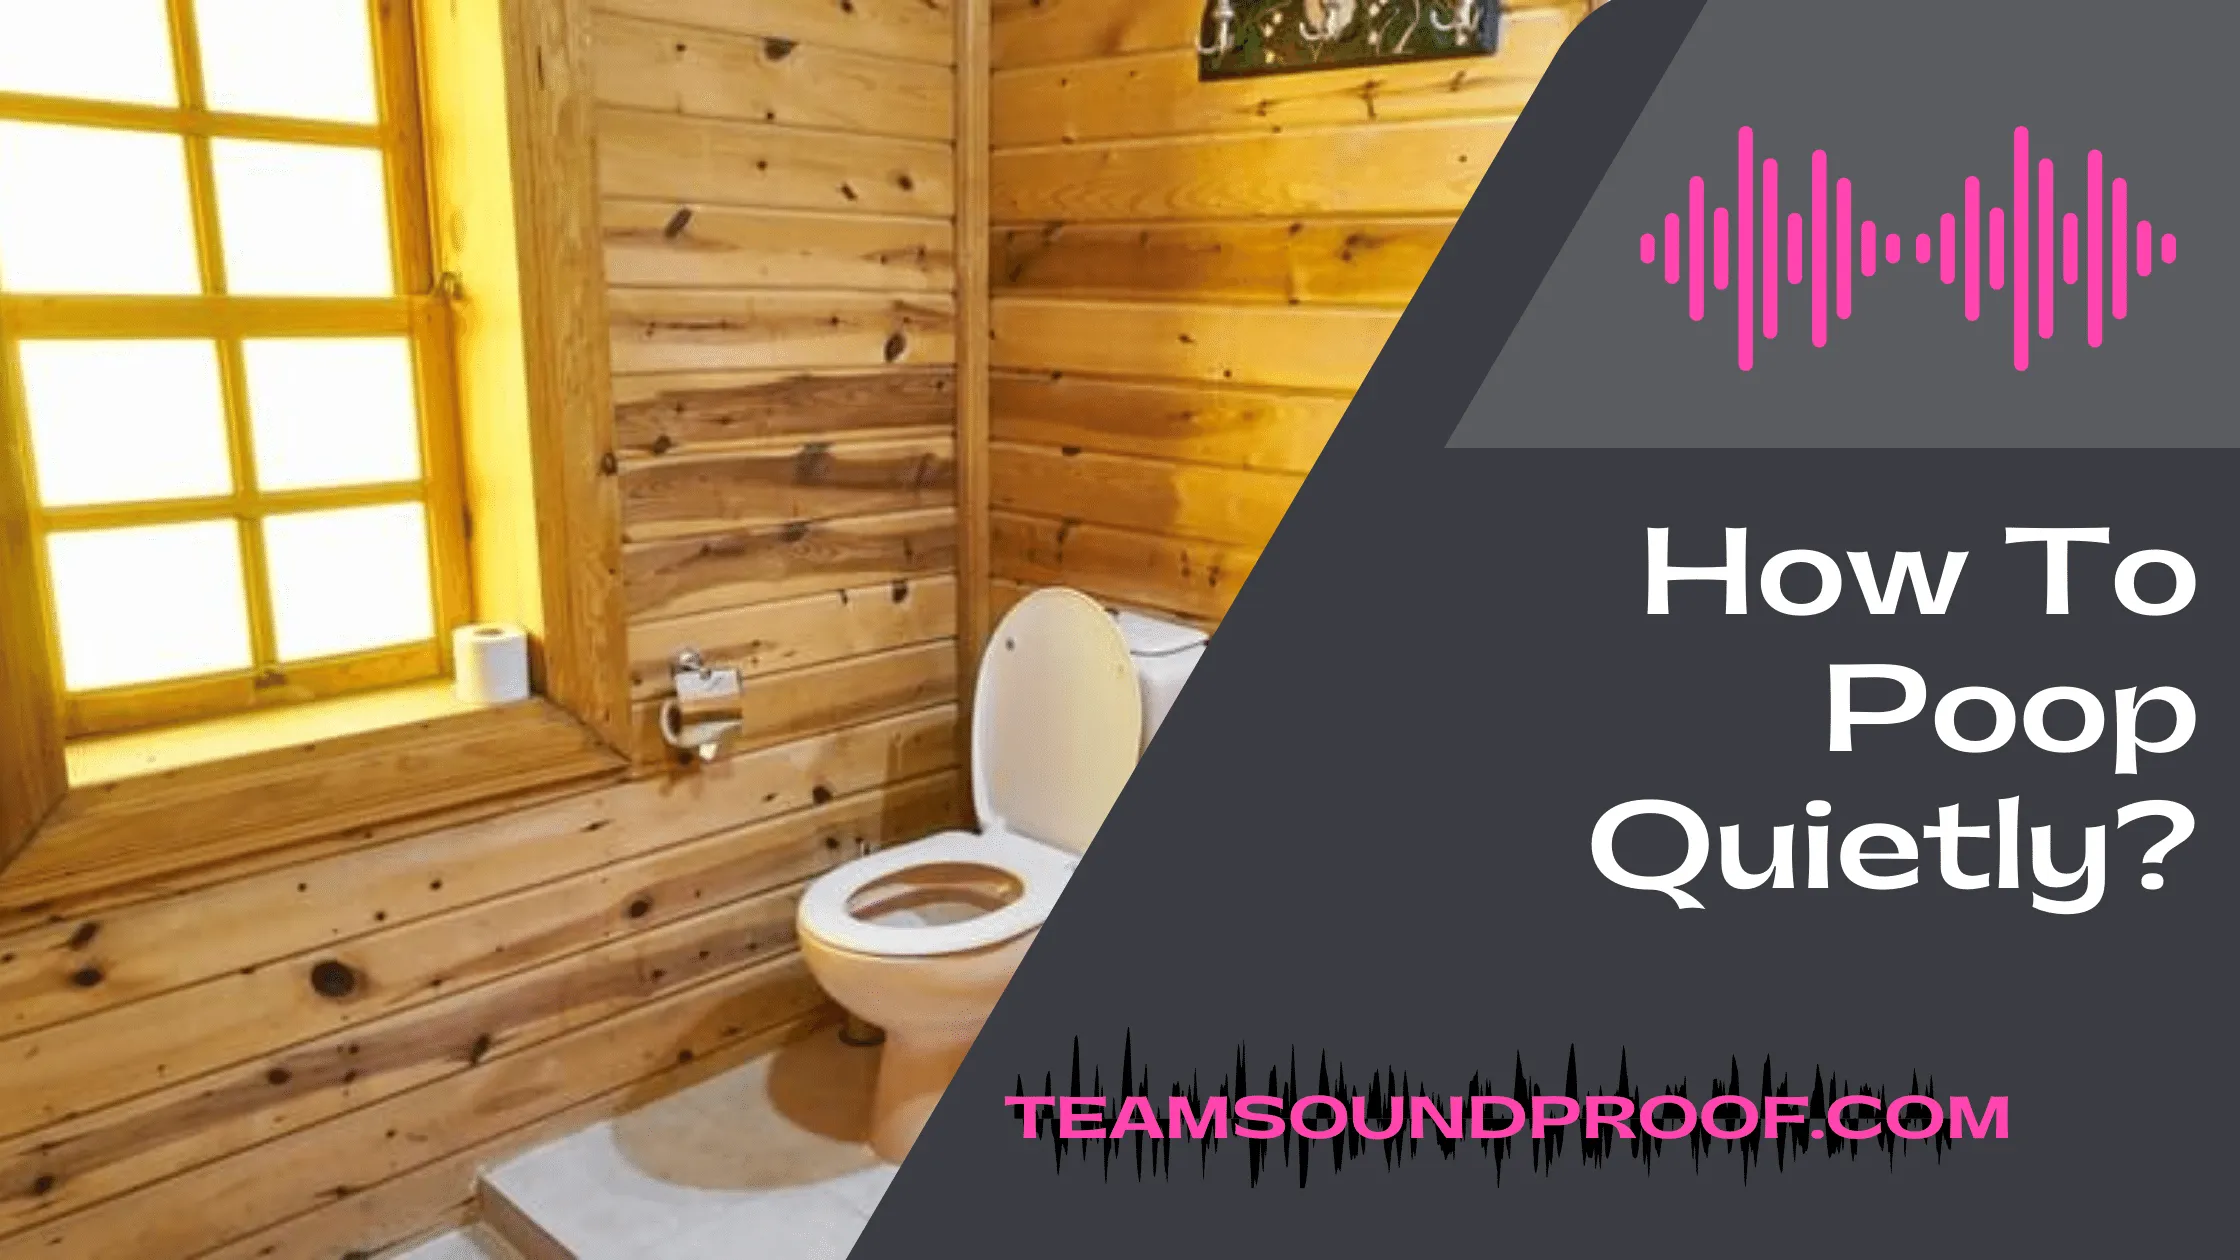 How To Poop Quietly? Complete Guide